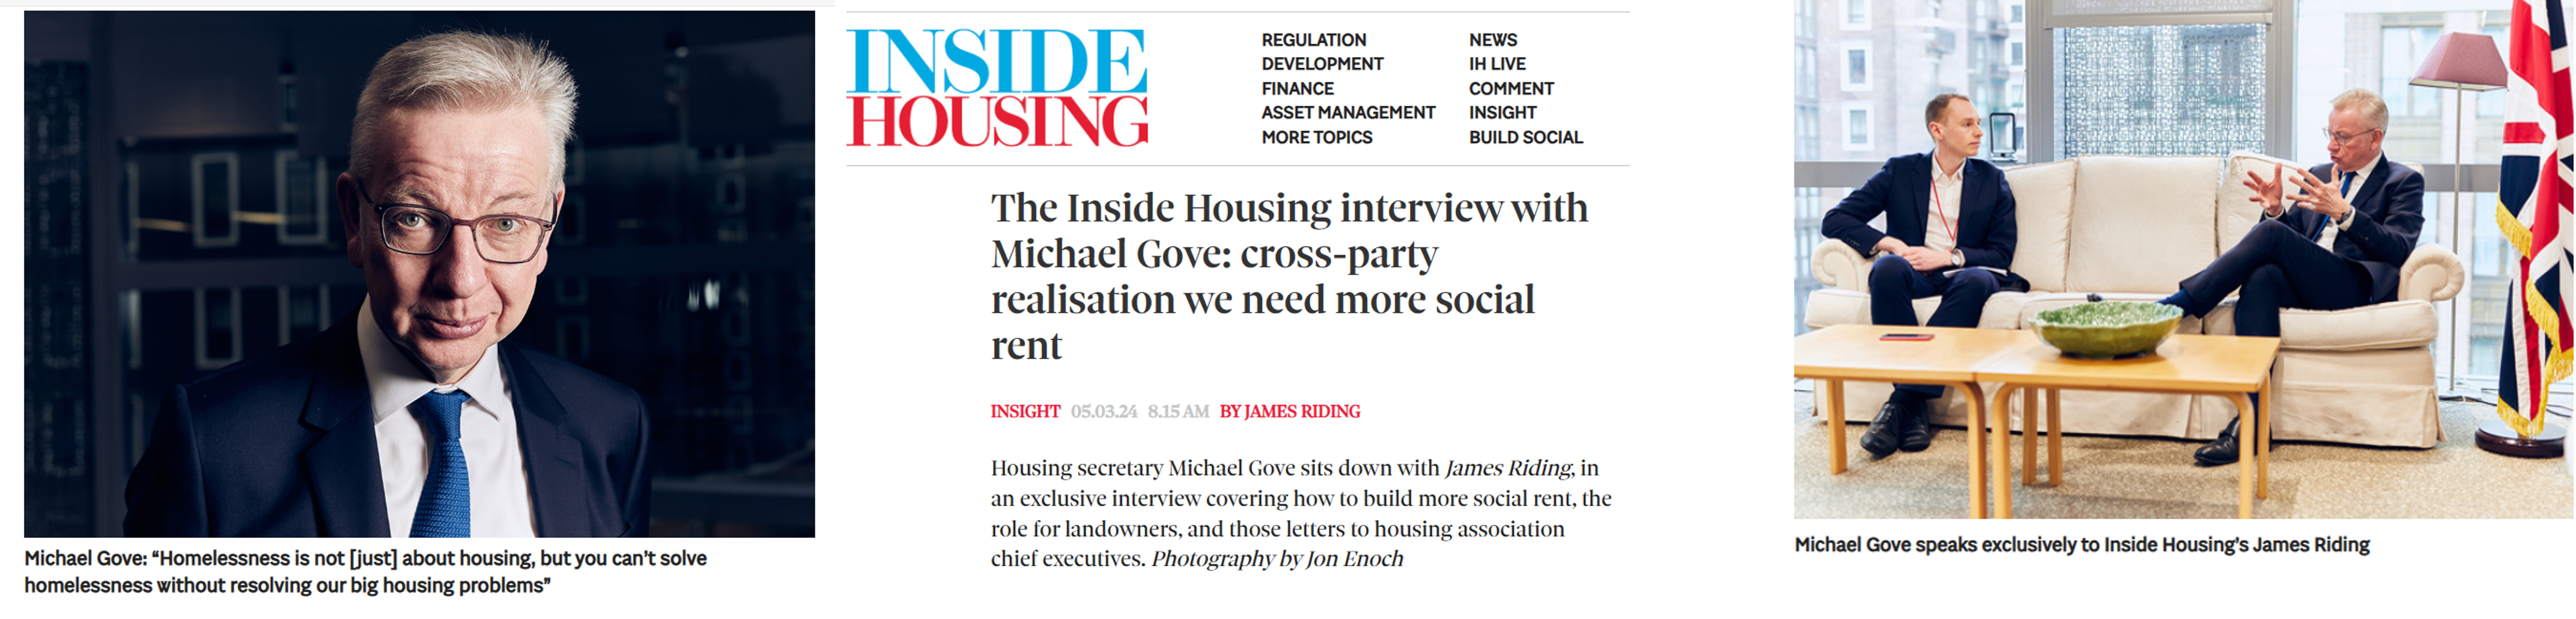 Michael Gove’s ‘Inside Housing’ interview